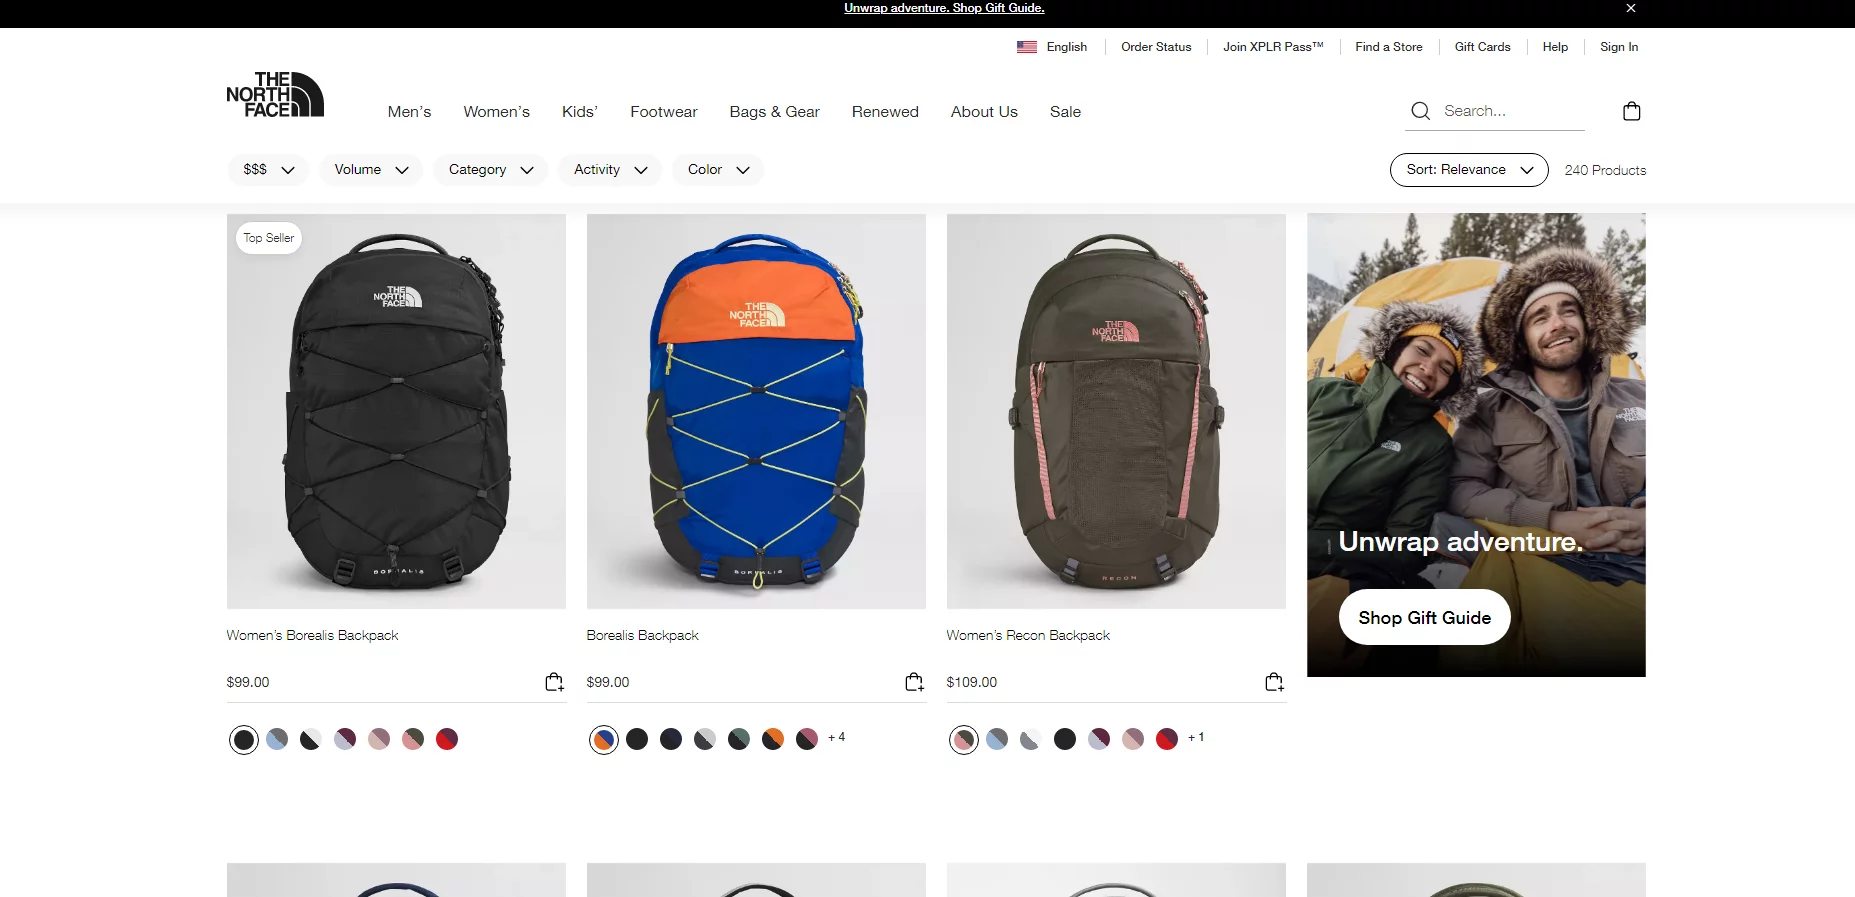 Best Bags to Dropshipping 2: Backpacks